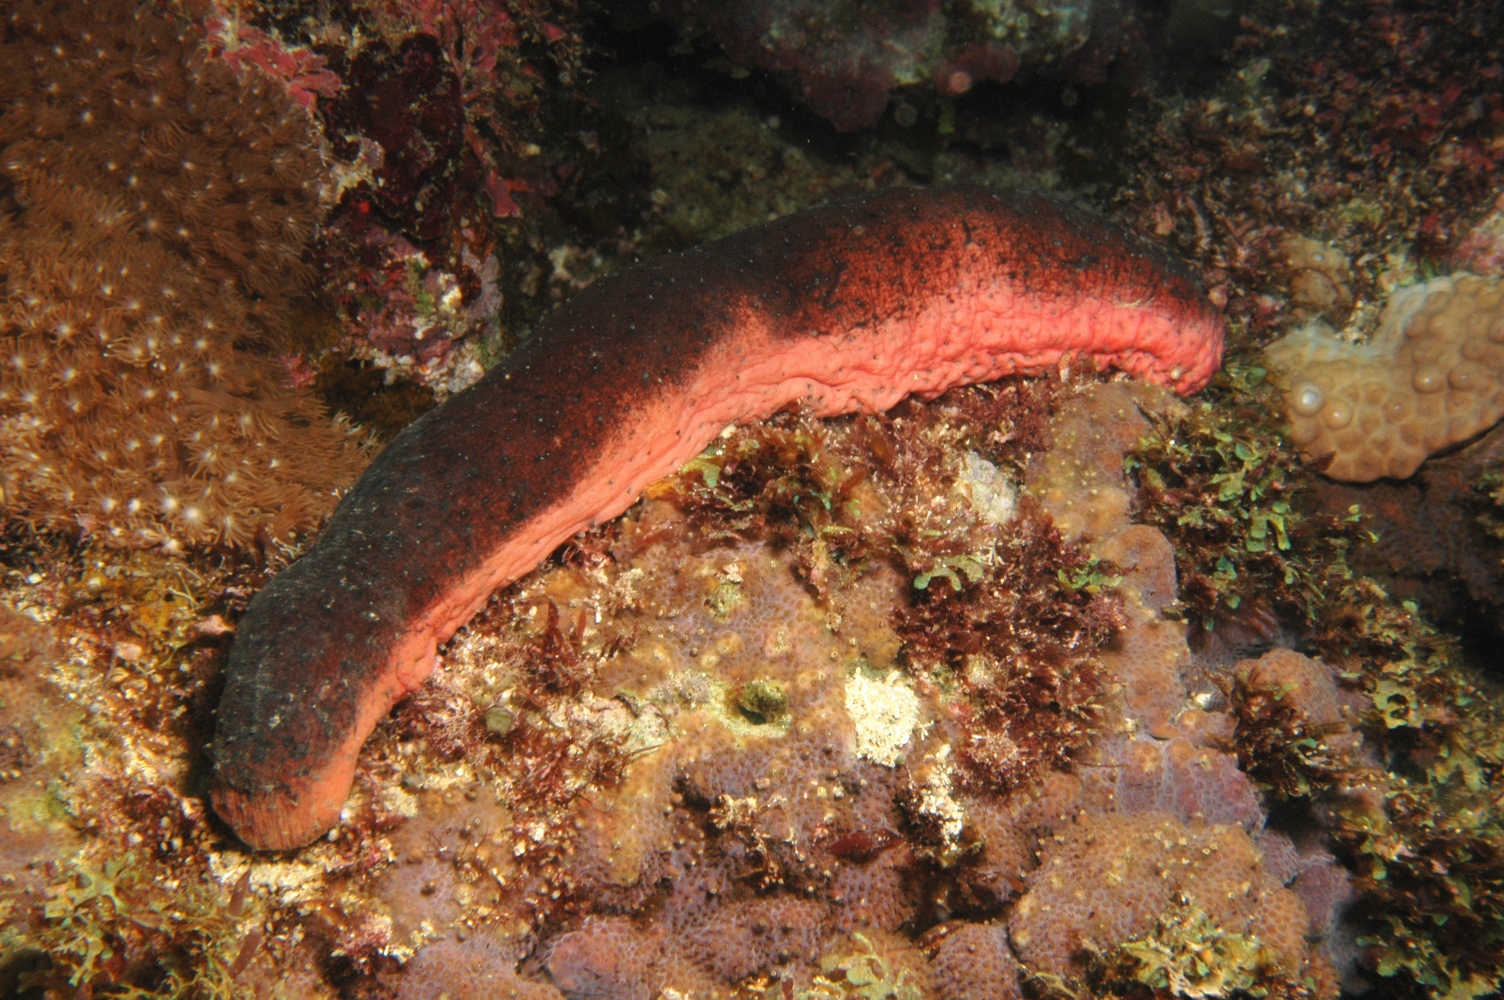 brown sea cucumber with pink belly